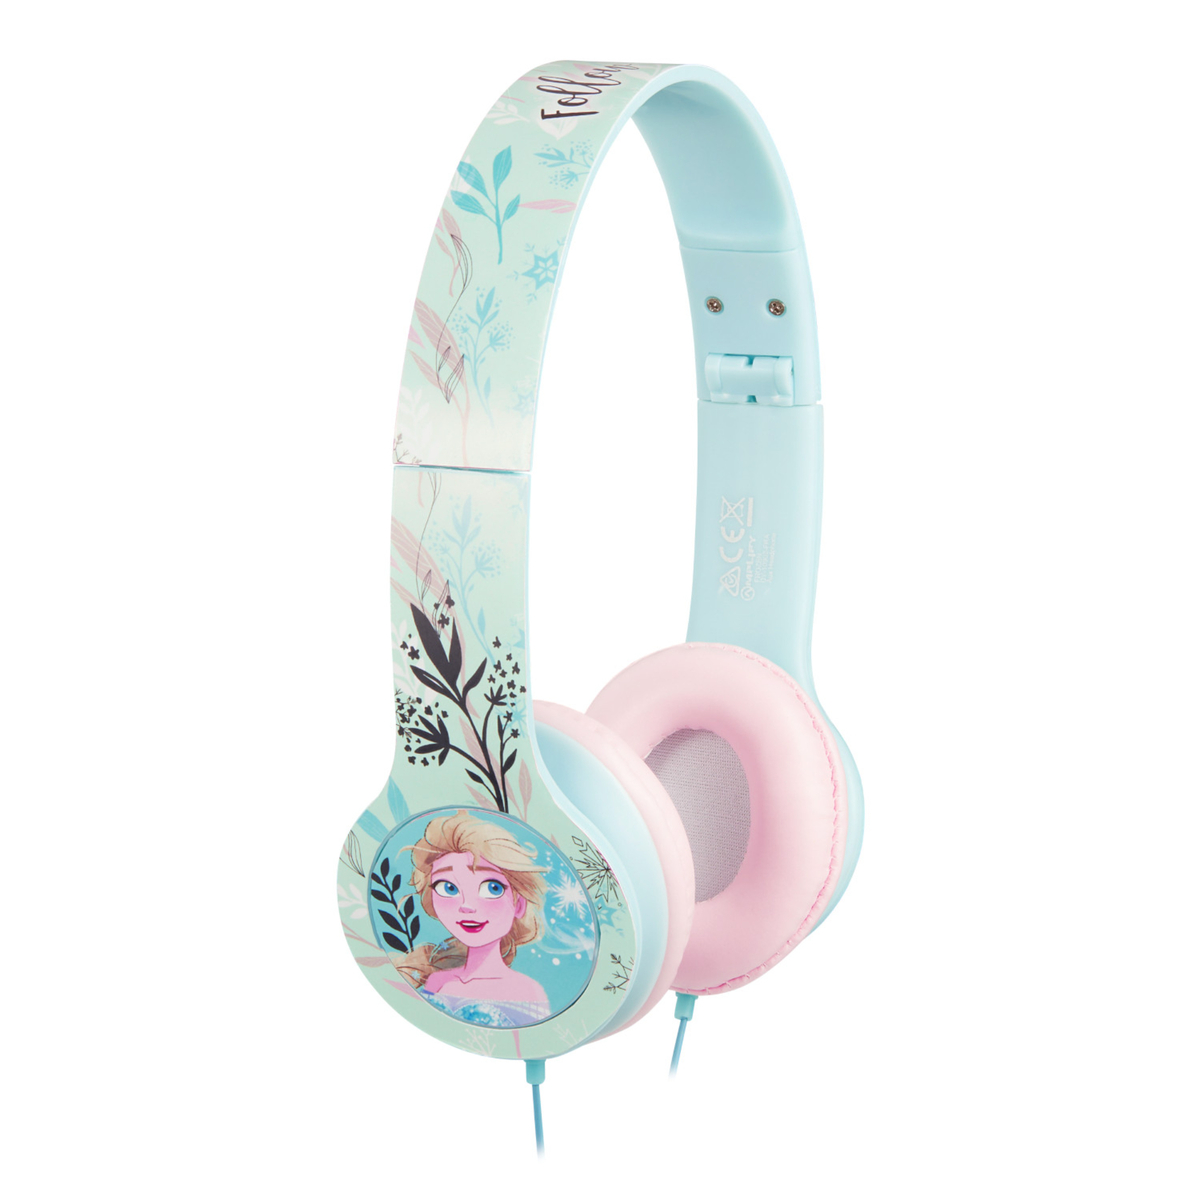 SMD Disney Frozen Stereo Headphones with Adjustable Headband and 1.2M Aux Cable, Blue, DY-10902-FRV